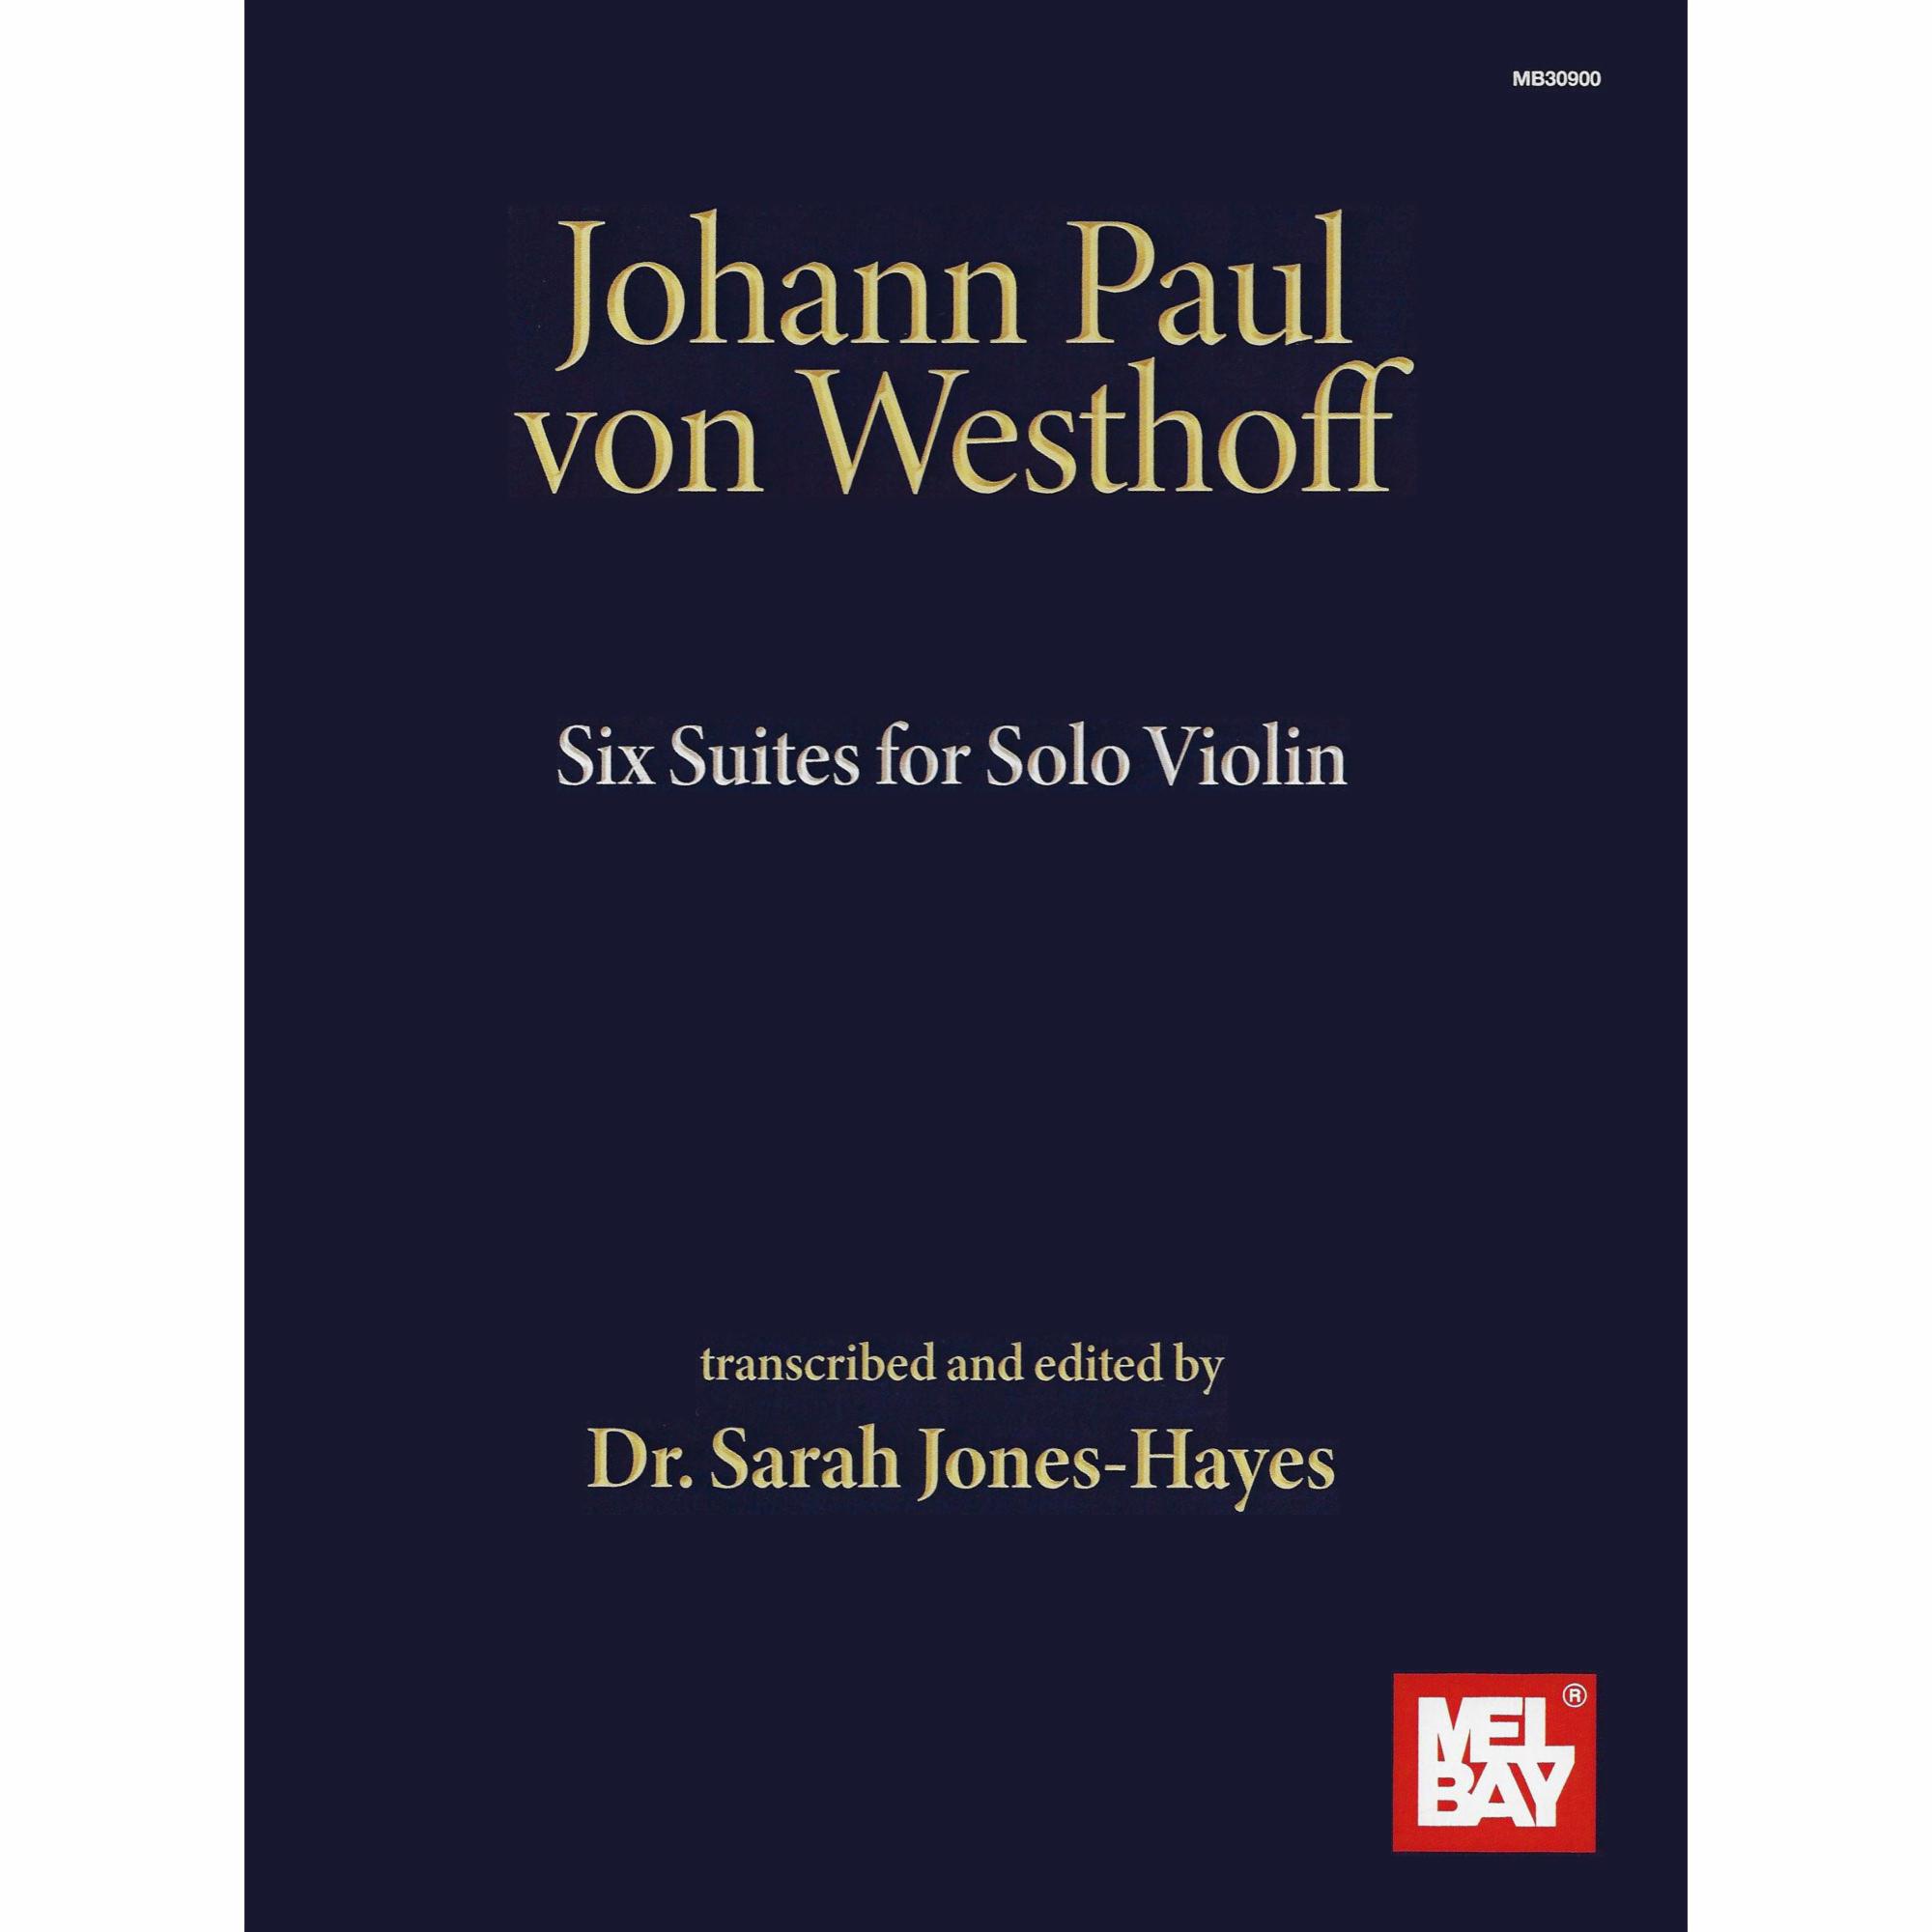 Westhoff -- Six Suites for Solo Violin